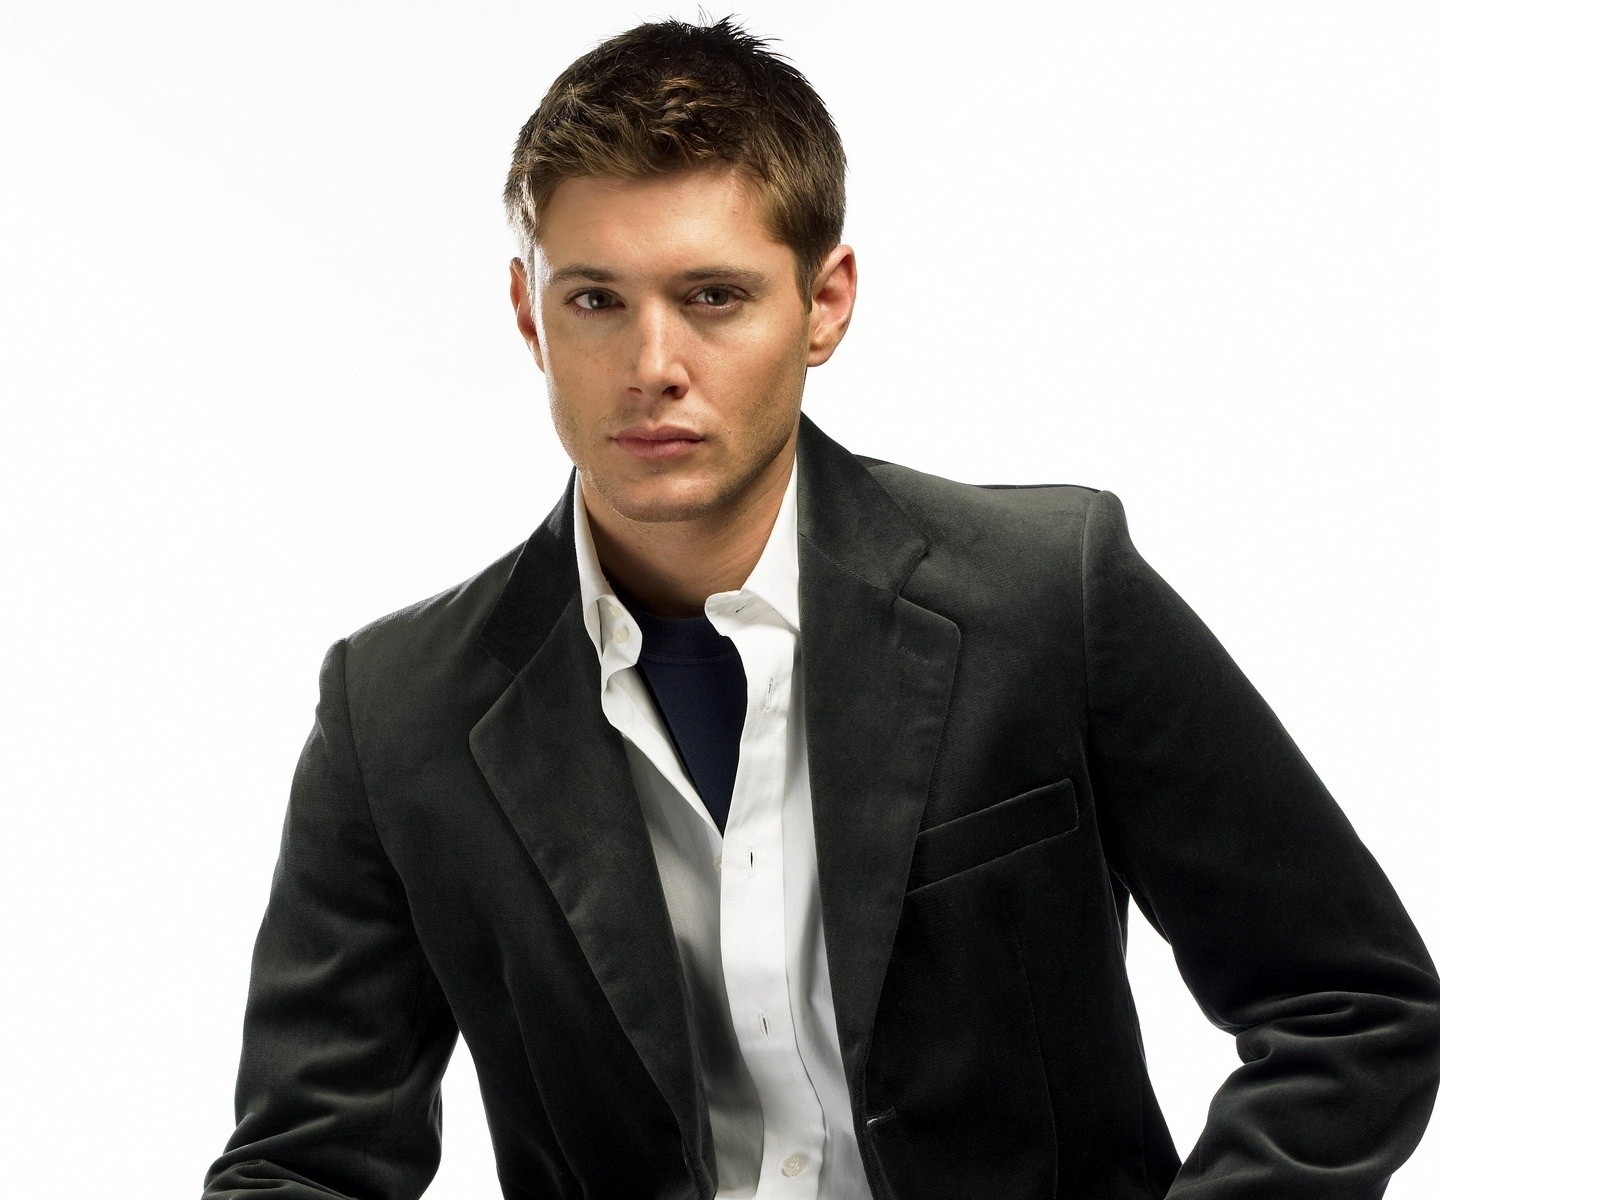 Cool Jensen Ackles for 1600 x 1200 resolution